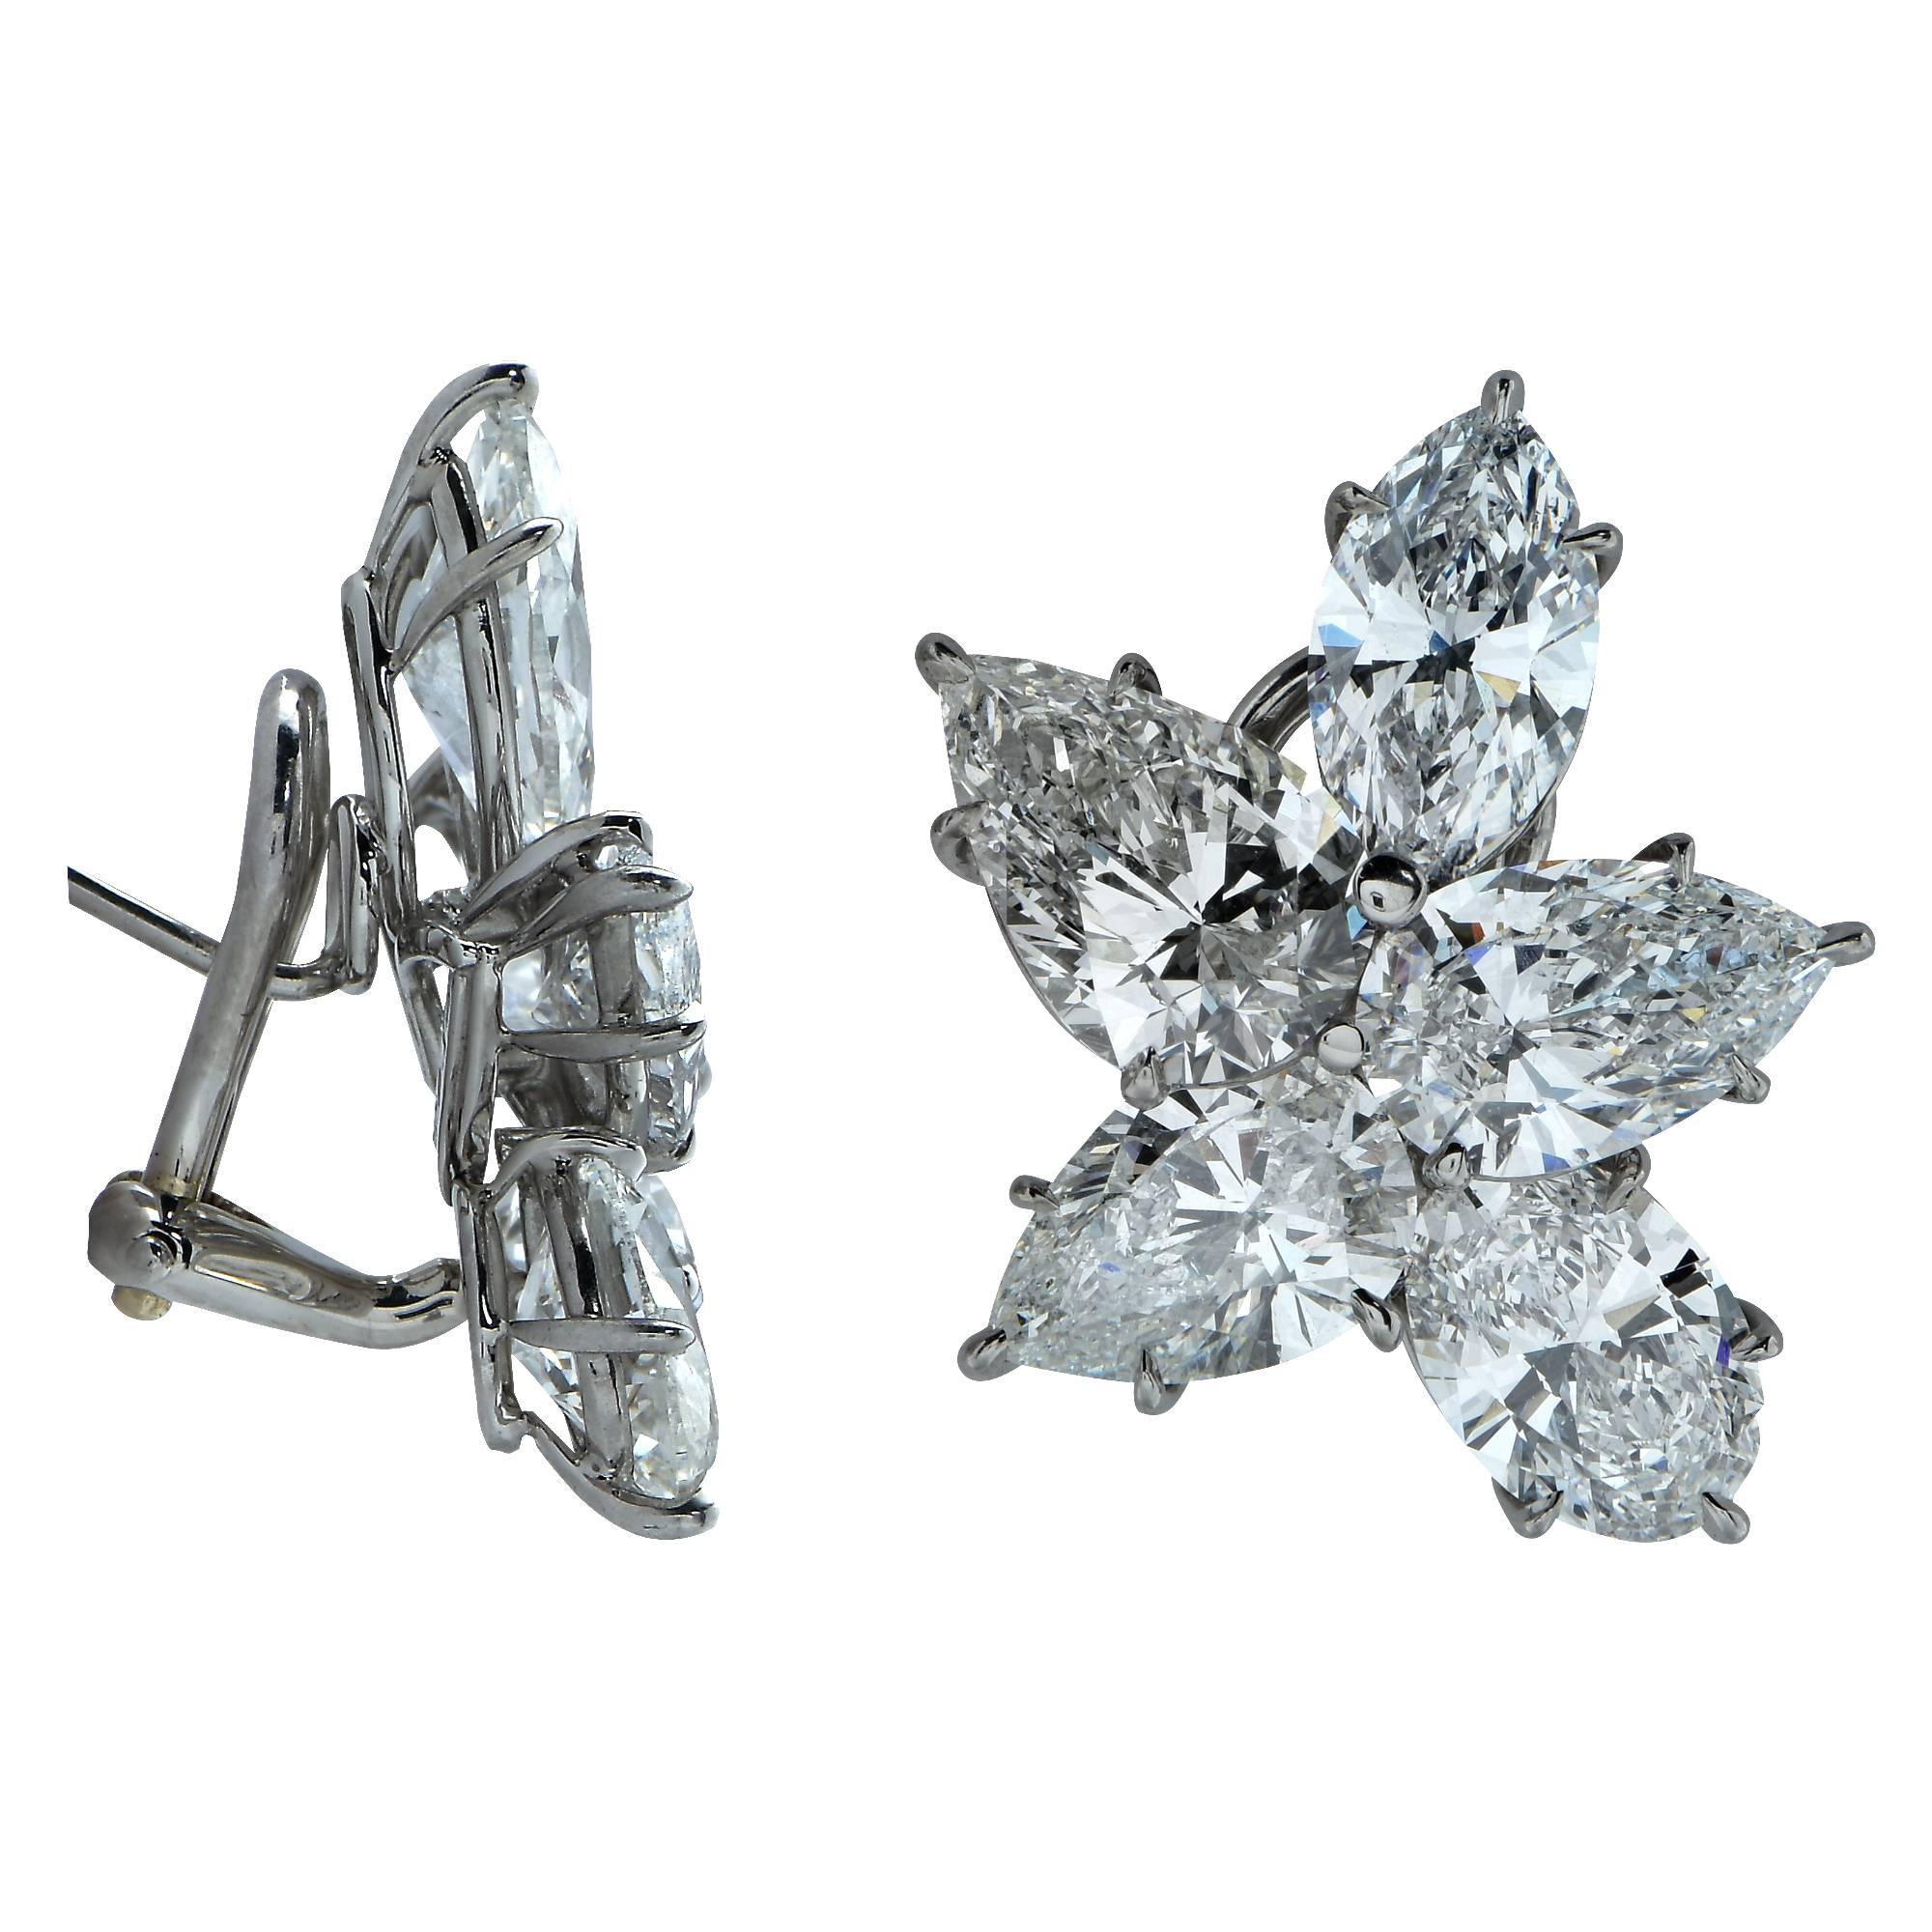 These handmade flower platinum earrings feature 10 sparkling marquise and pear shape diamonds weighing approximately 12cts total, D-E color, VS-SI clarity.

Measurements are available upon request.
It is stamped and/or tested as 18k platinum.
The